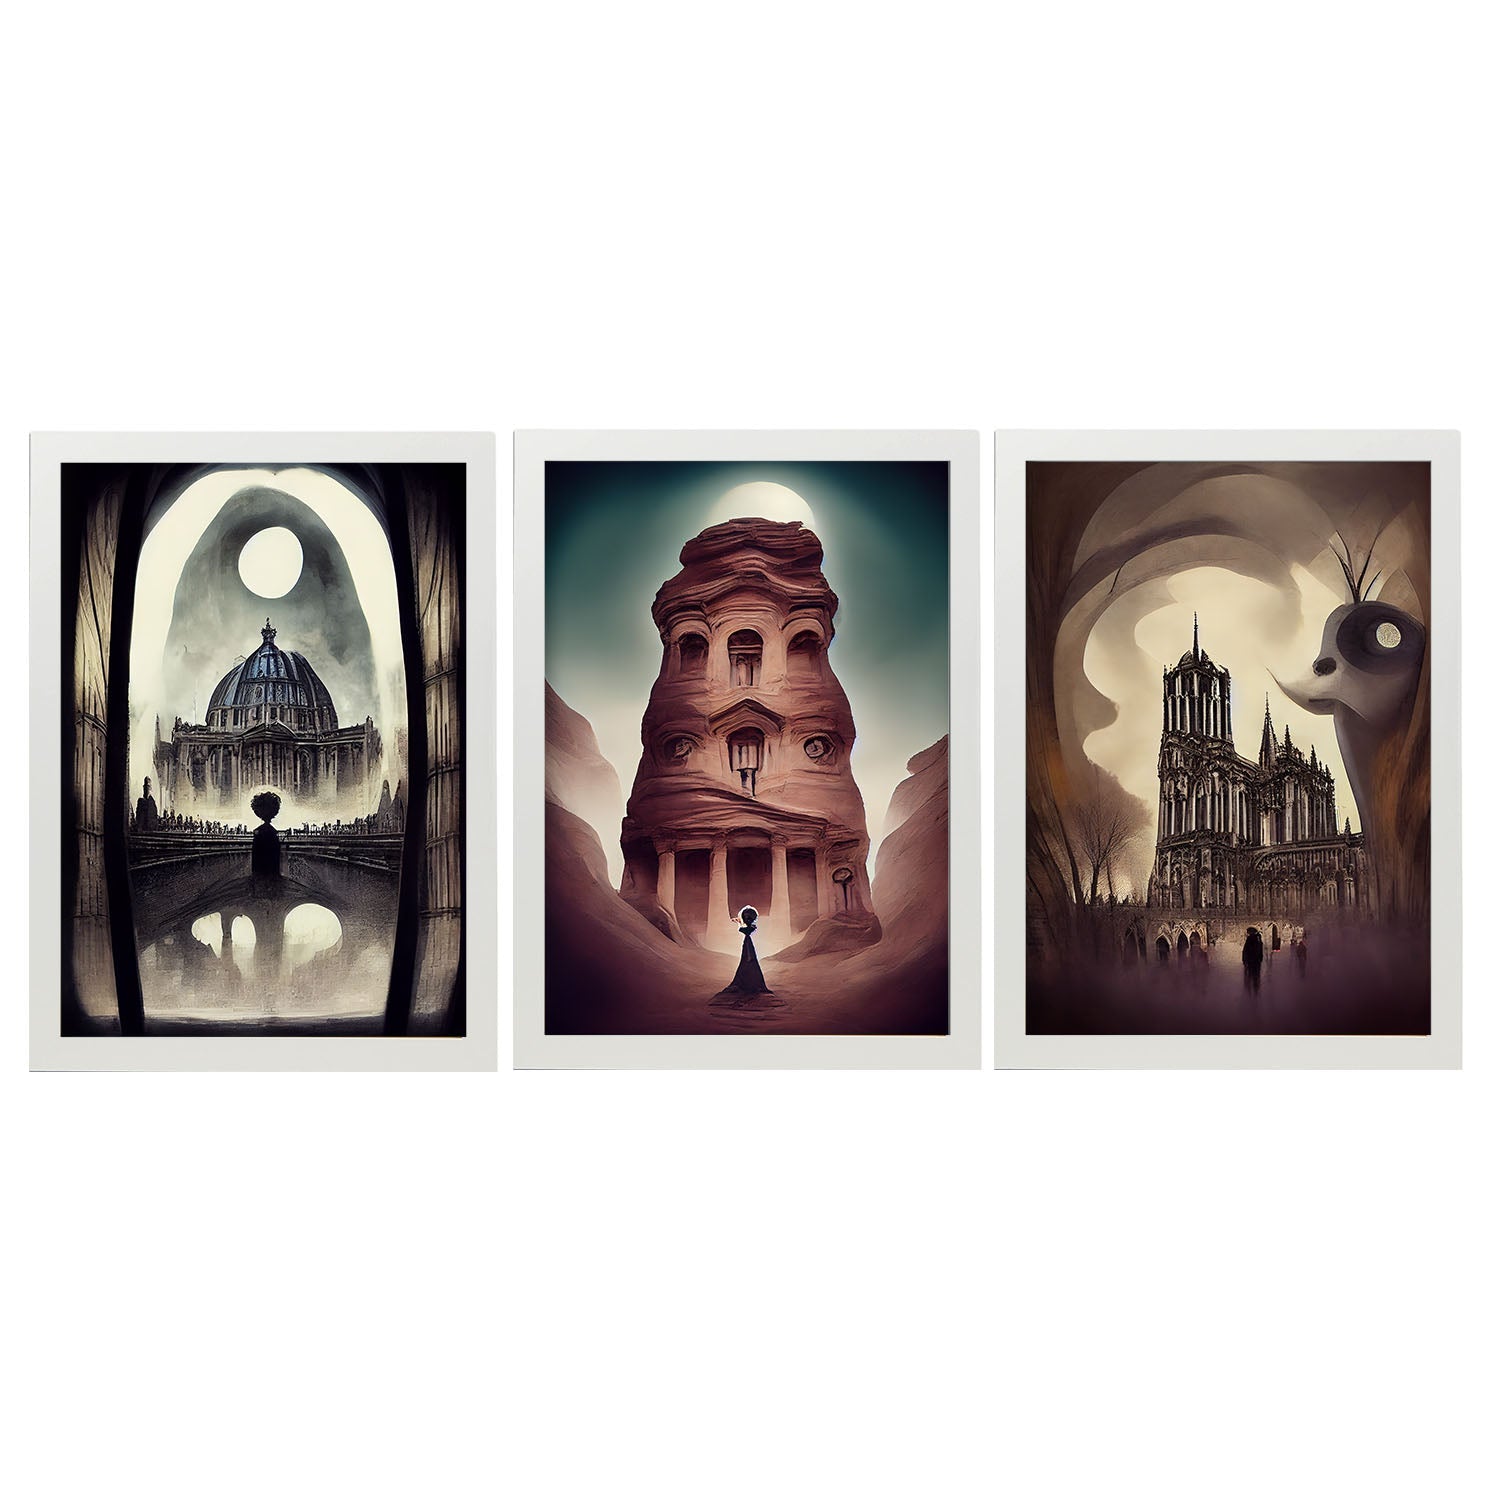 Burton style Illustrations of monuments and cities inspired by Burton's Dark and Goth art Interior Design and Decoration Set Collection 10-Artwork-Nacnic-A4-Marco Blanco-Nacnic Estudio SL